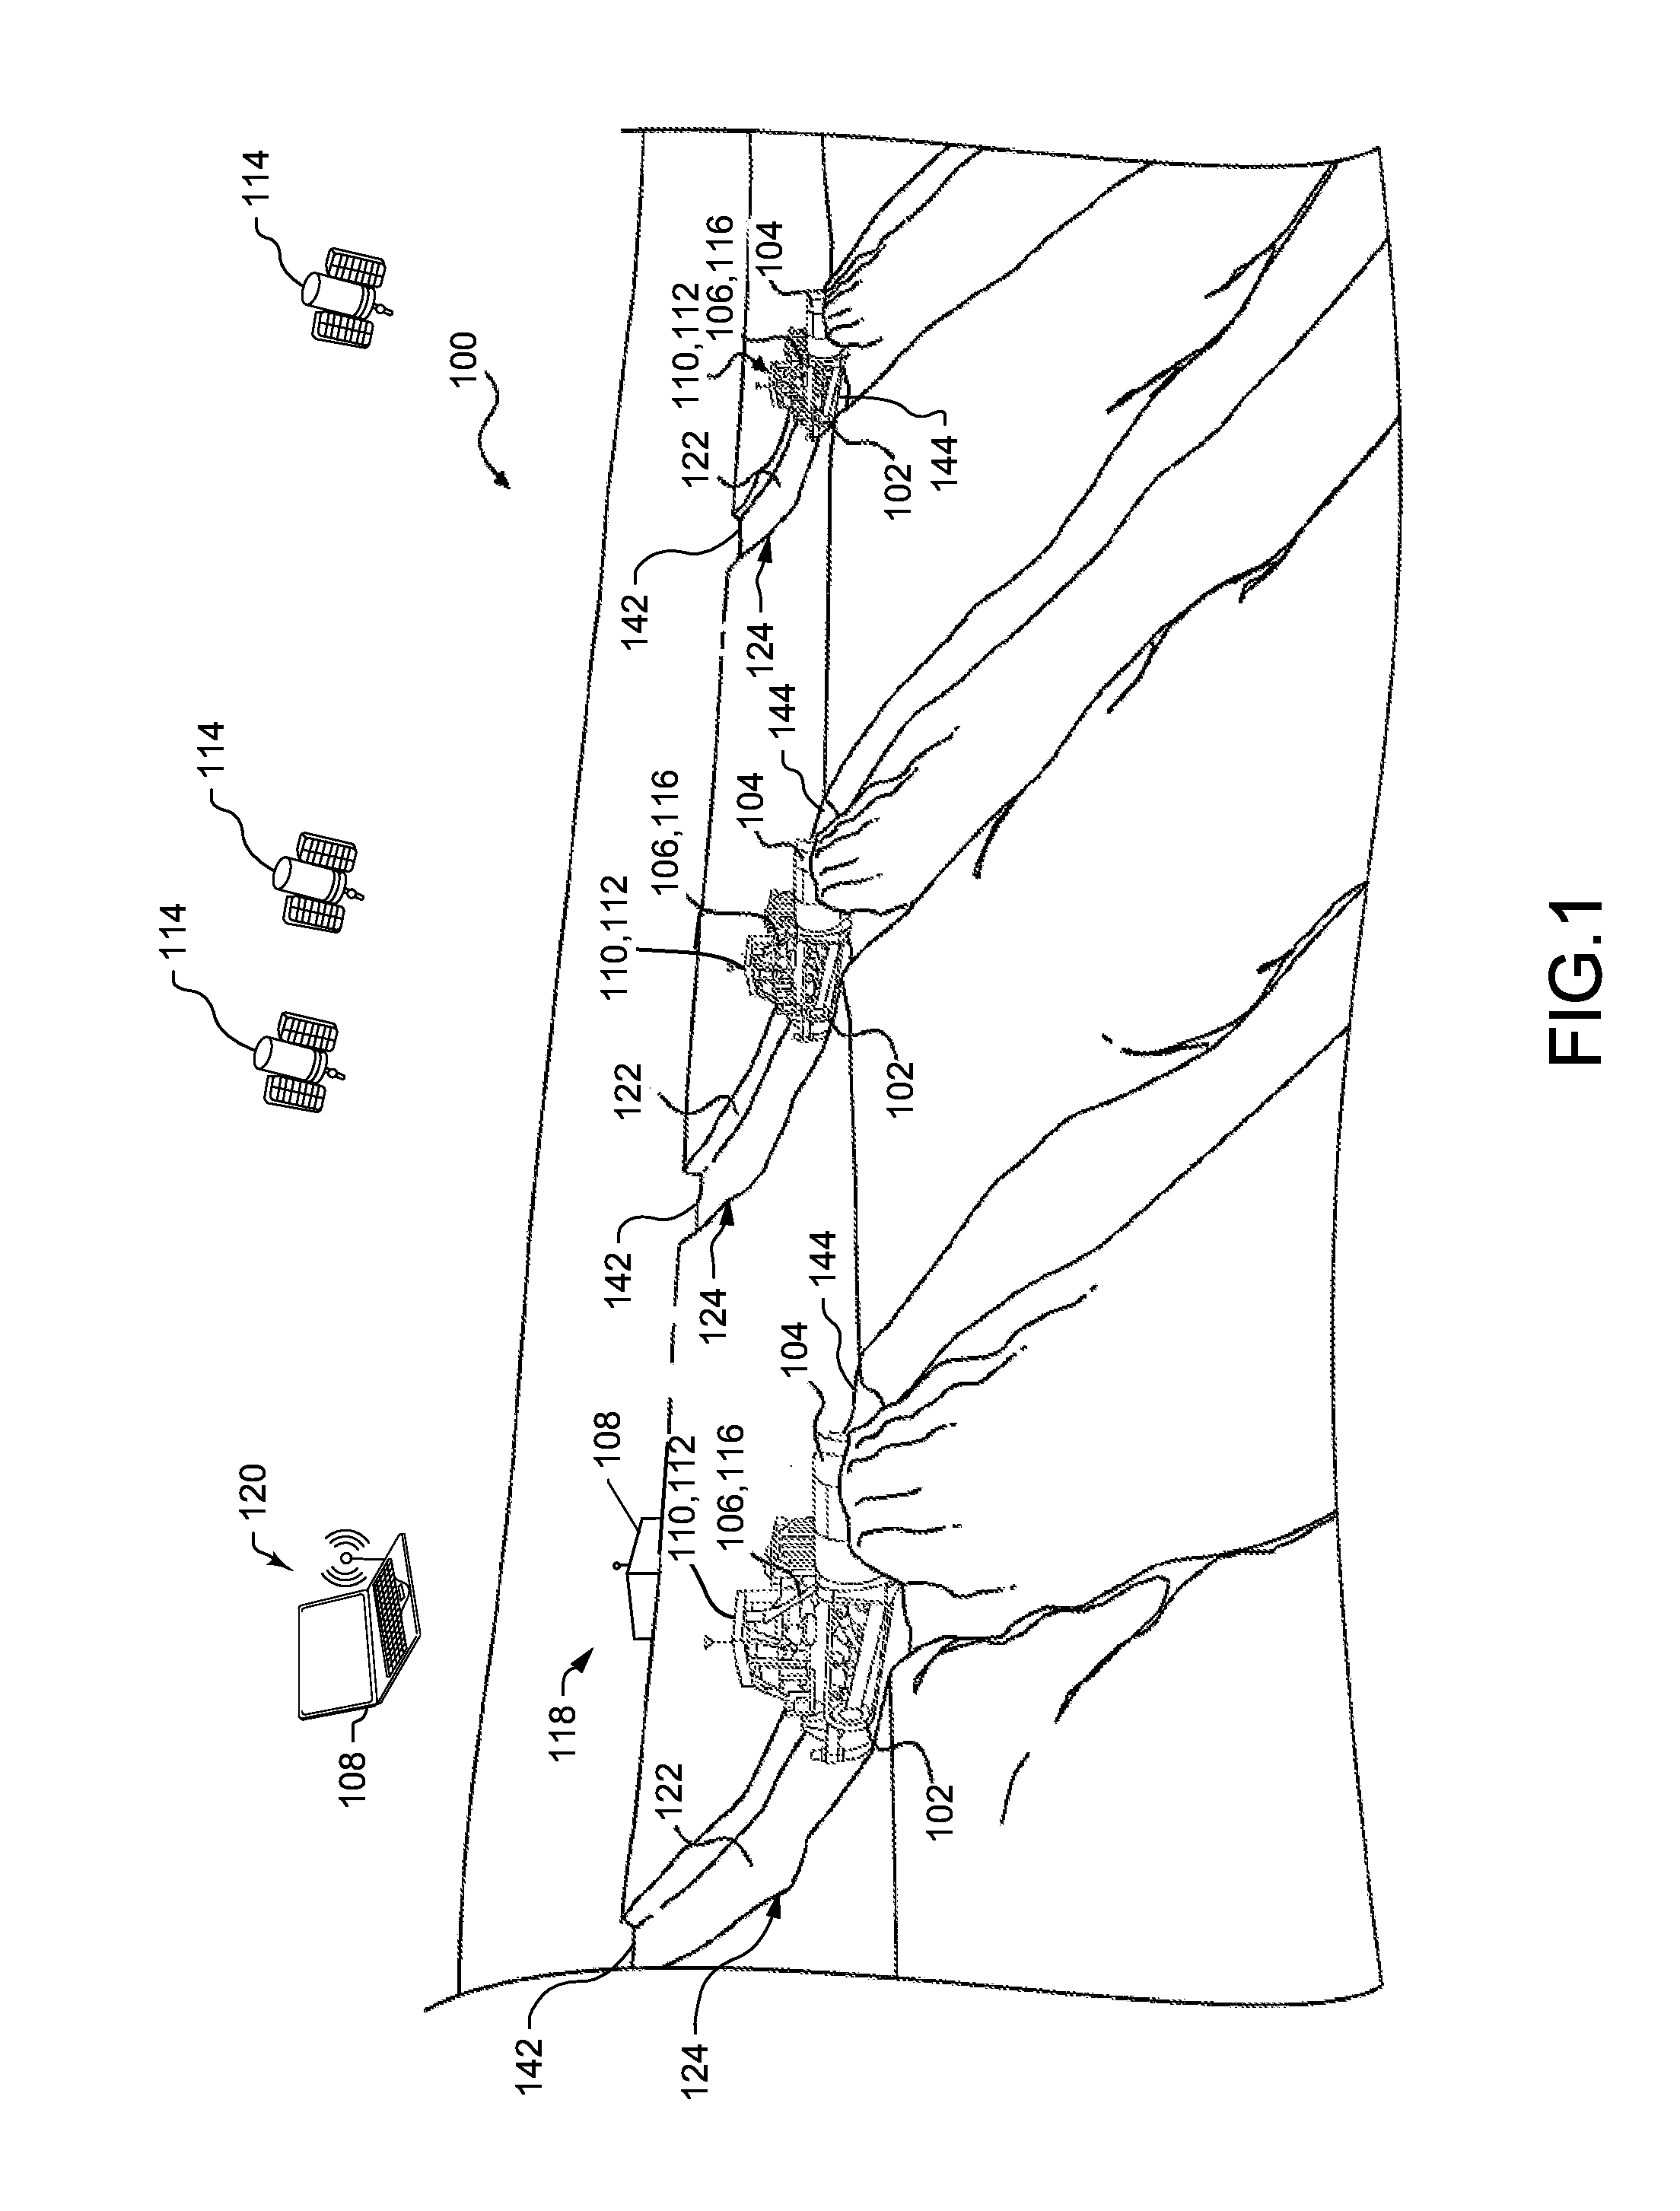 Systems and Methods for Constrained Dozing